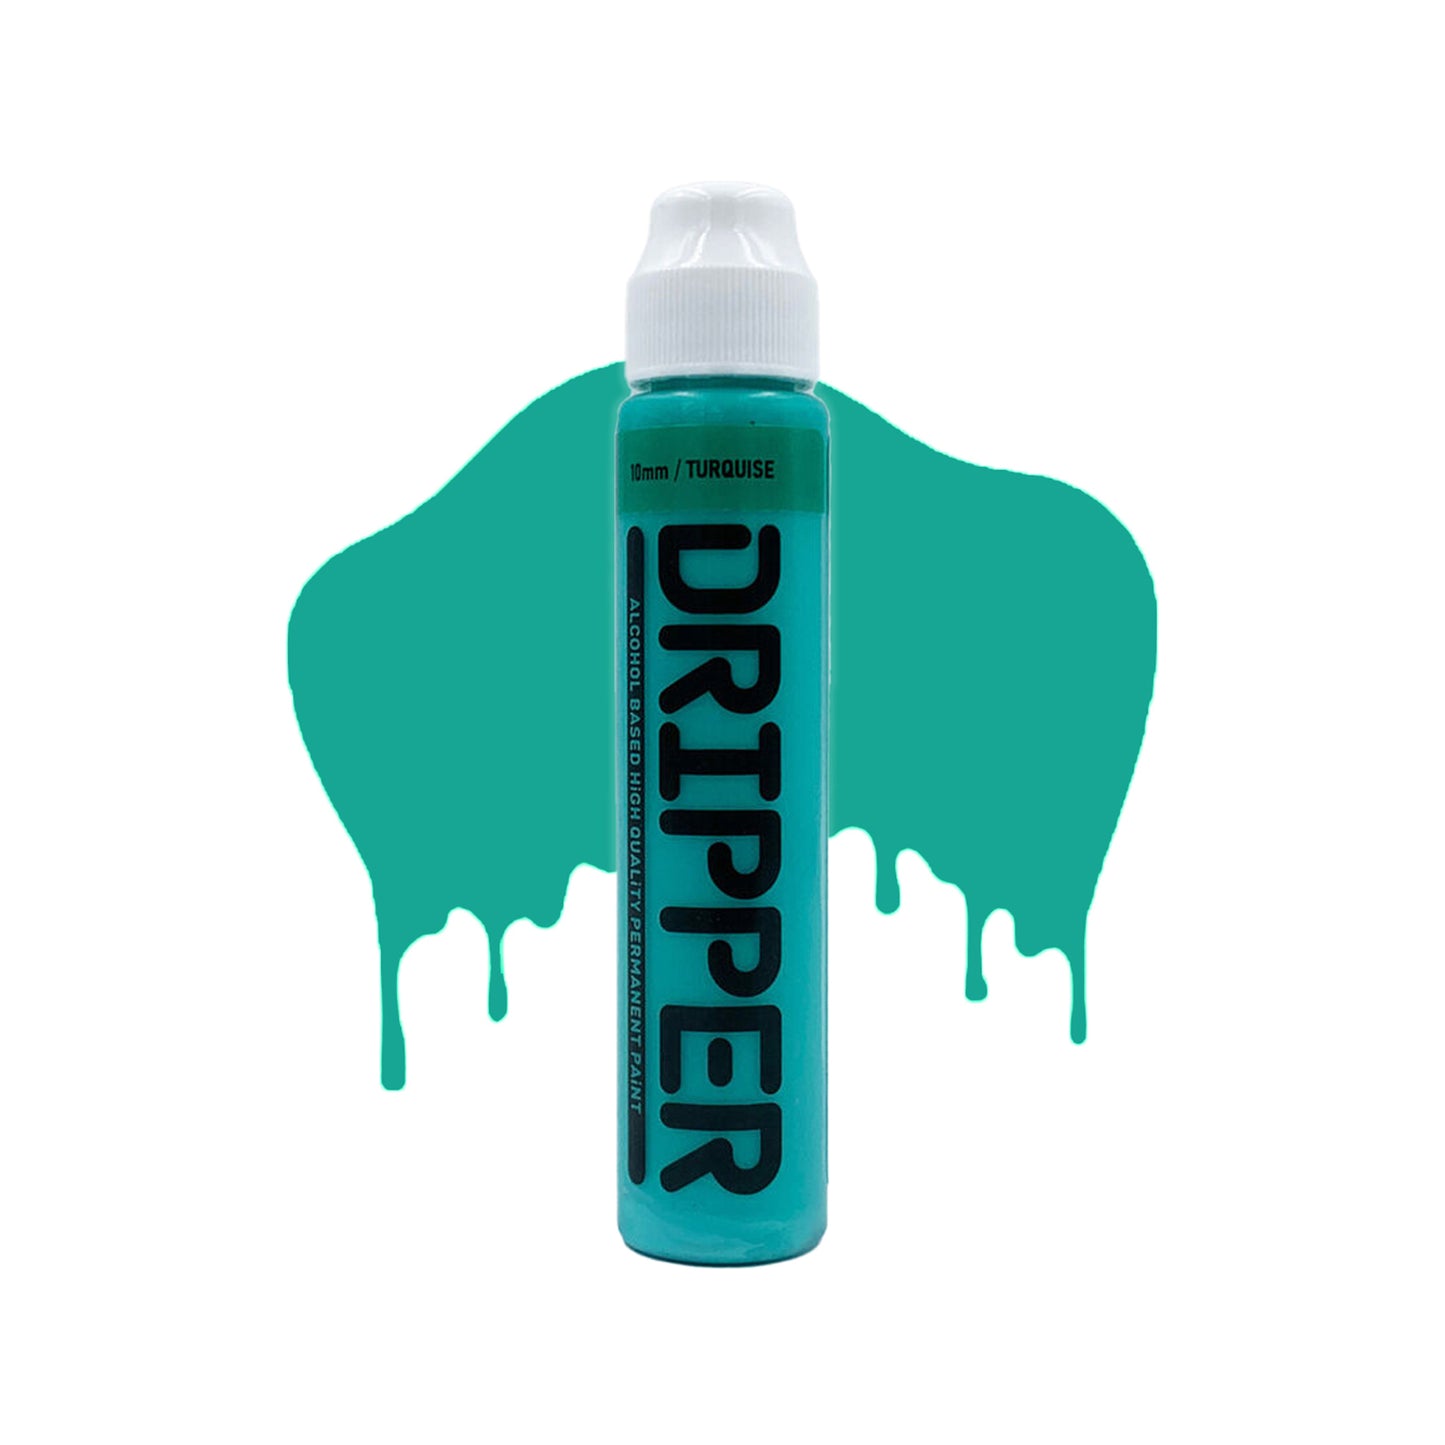 Turquoise mop container with white cap and the word "Dripper" written on the face in a bold black font. The mop is positioned in front of a white background with drips that match the turquoise color of the mop.